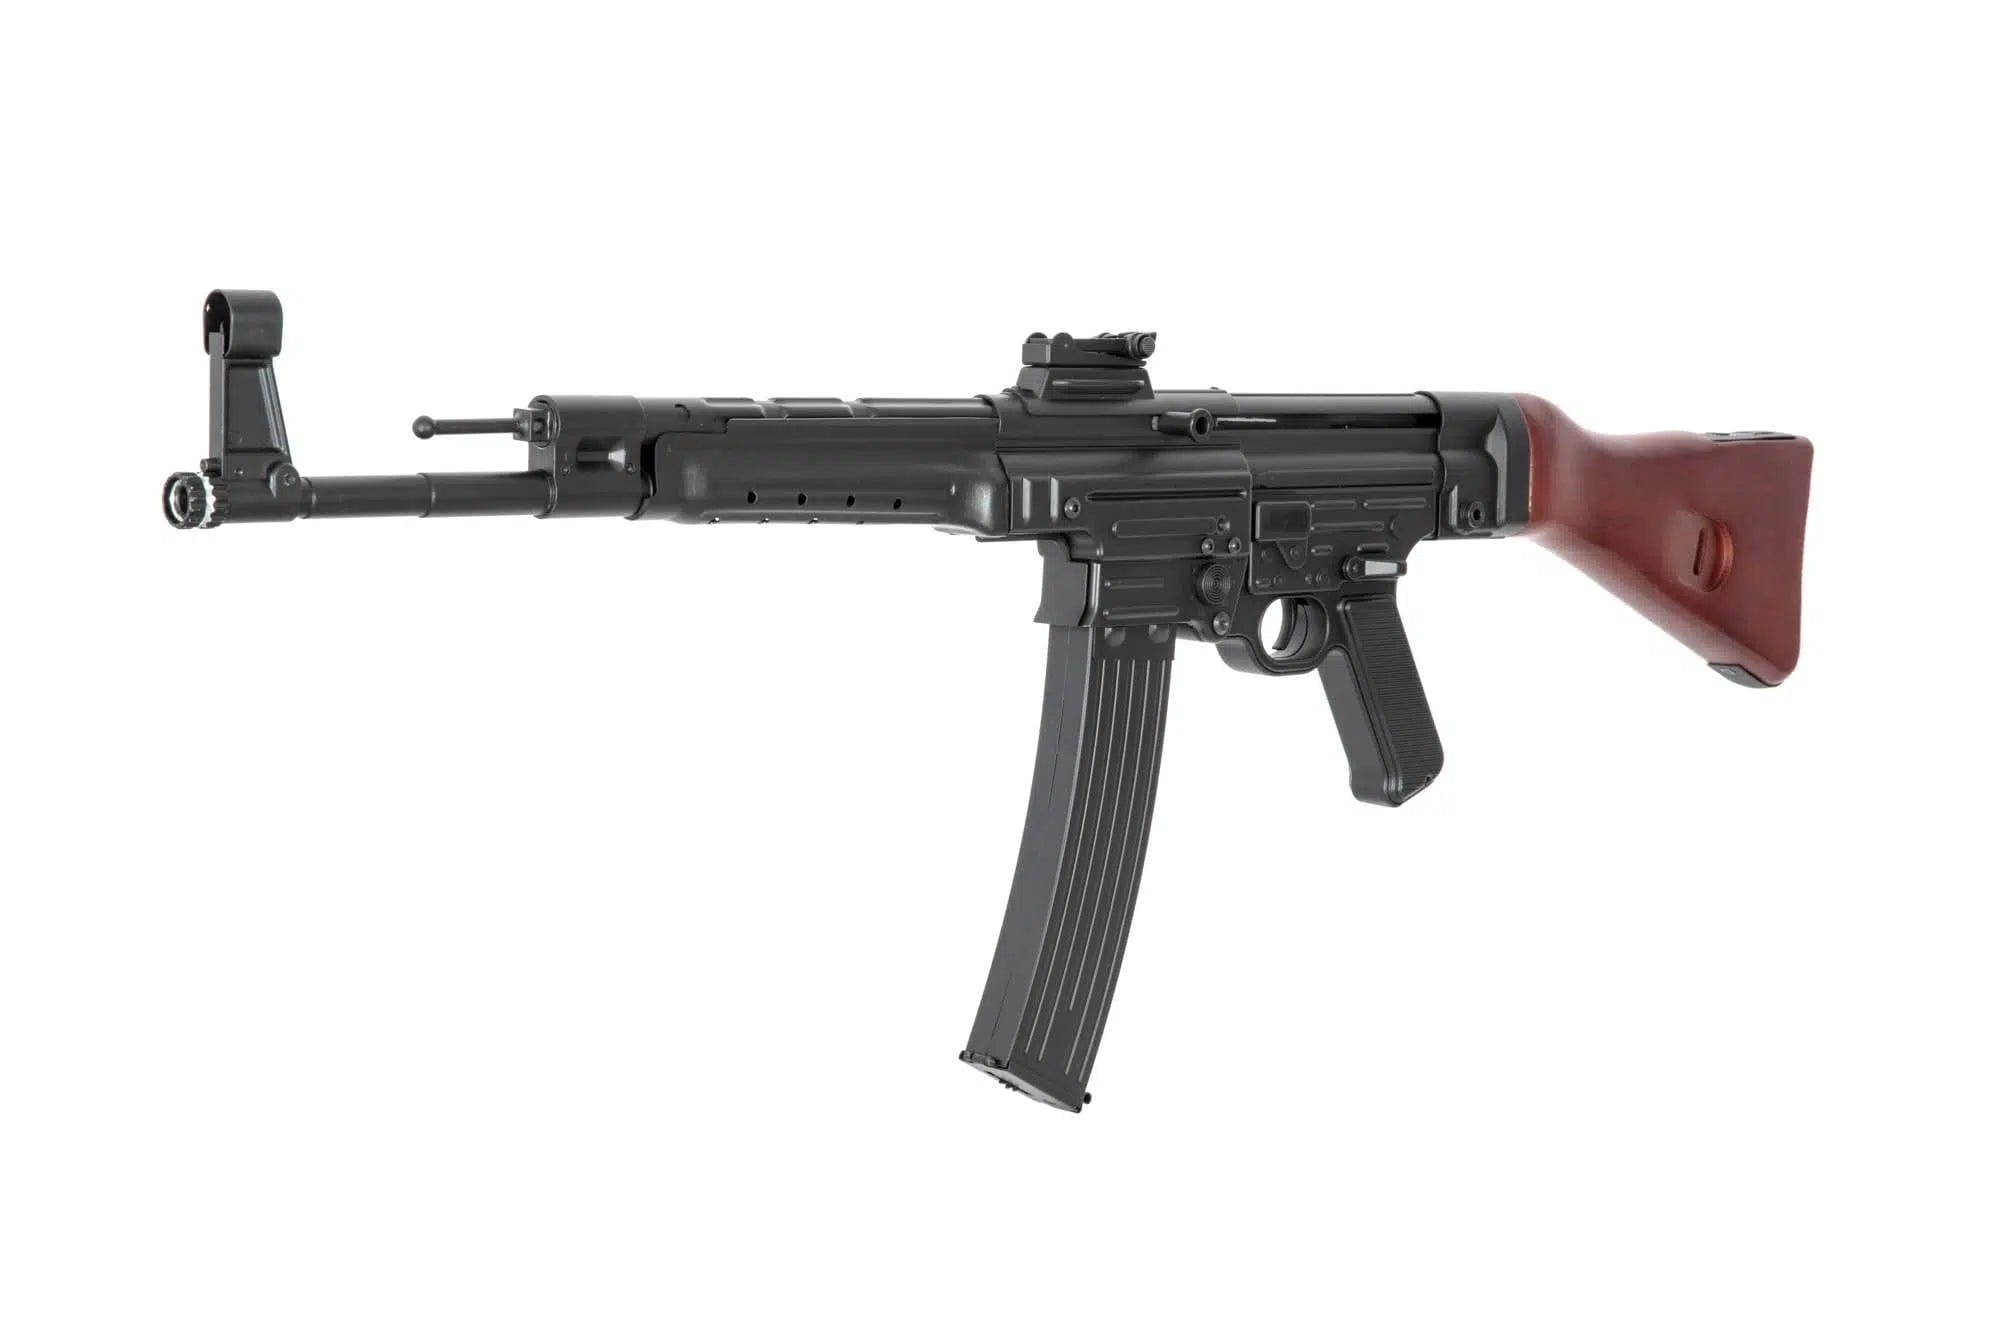 STG44 WWII airsoft rifle replica